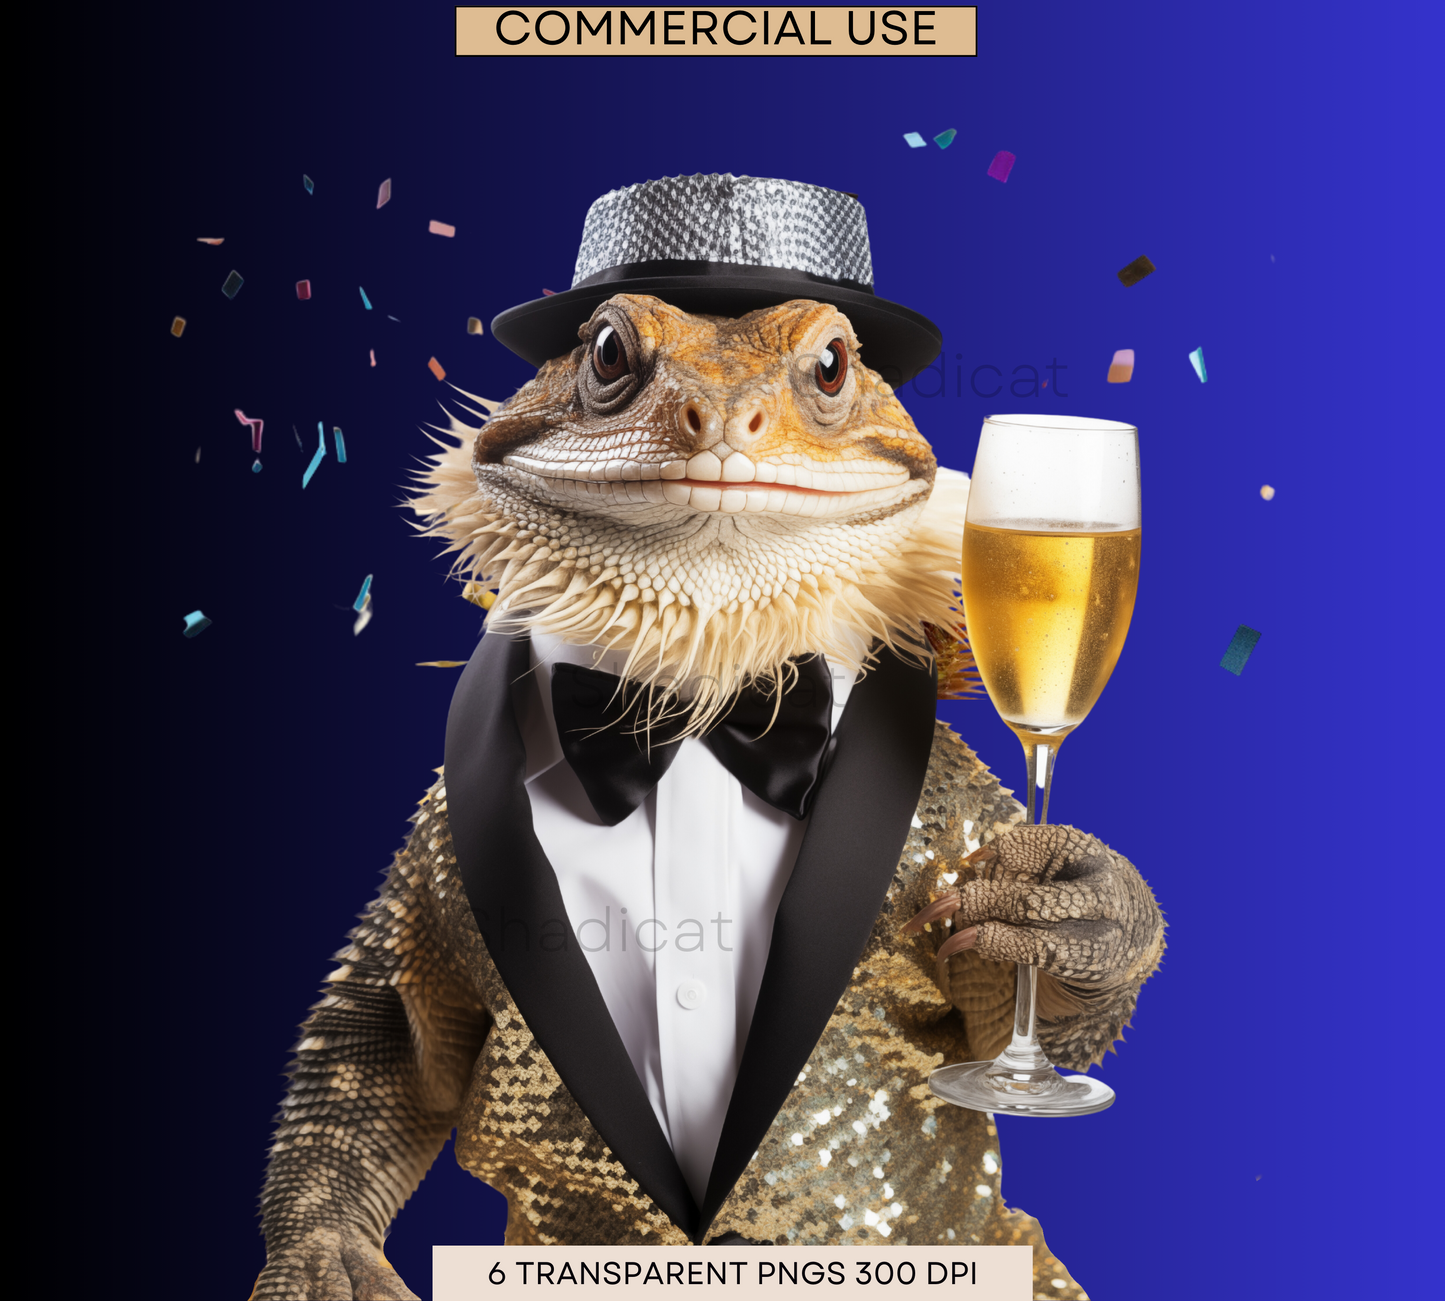 Bearded Dragon New Years, Clipart, Commercial Use, Card Making, Cute Beardie, Transparent PNGs, Cute Animal, New Year's Party Invitation